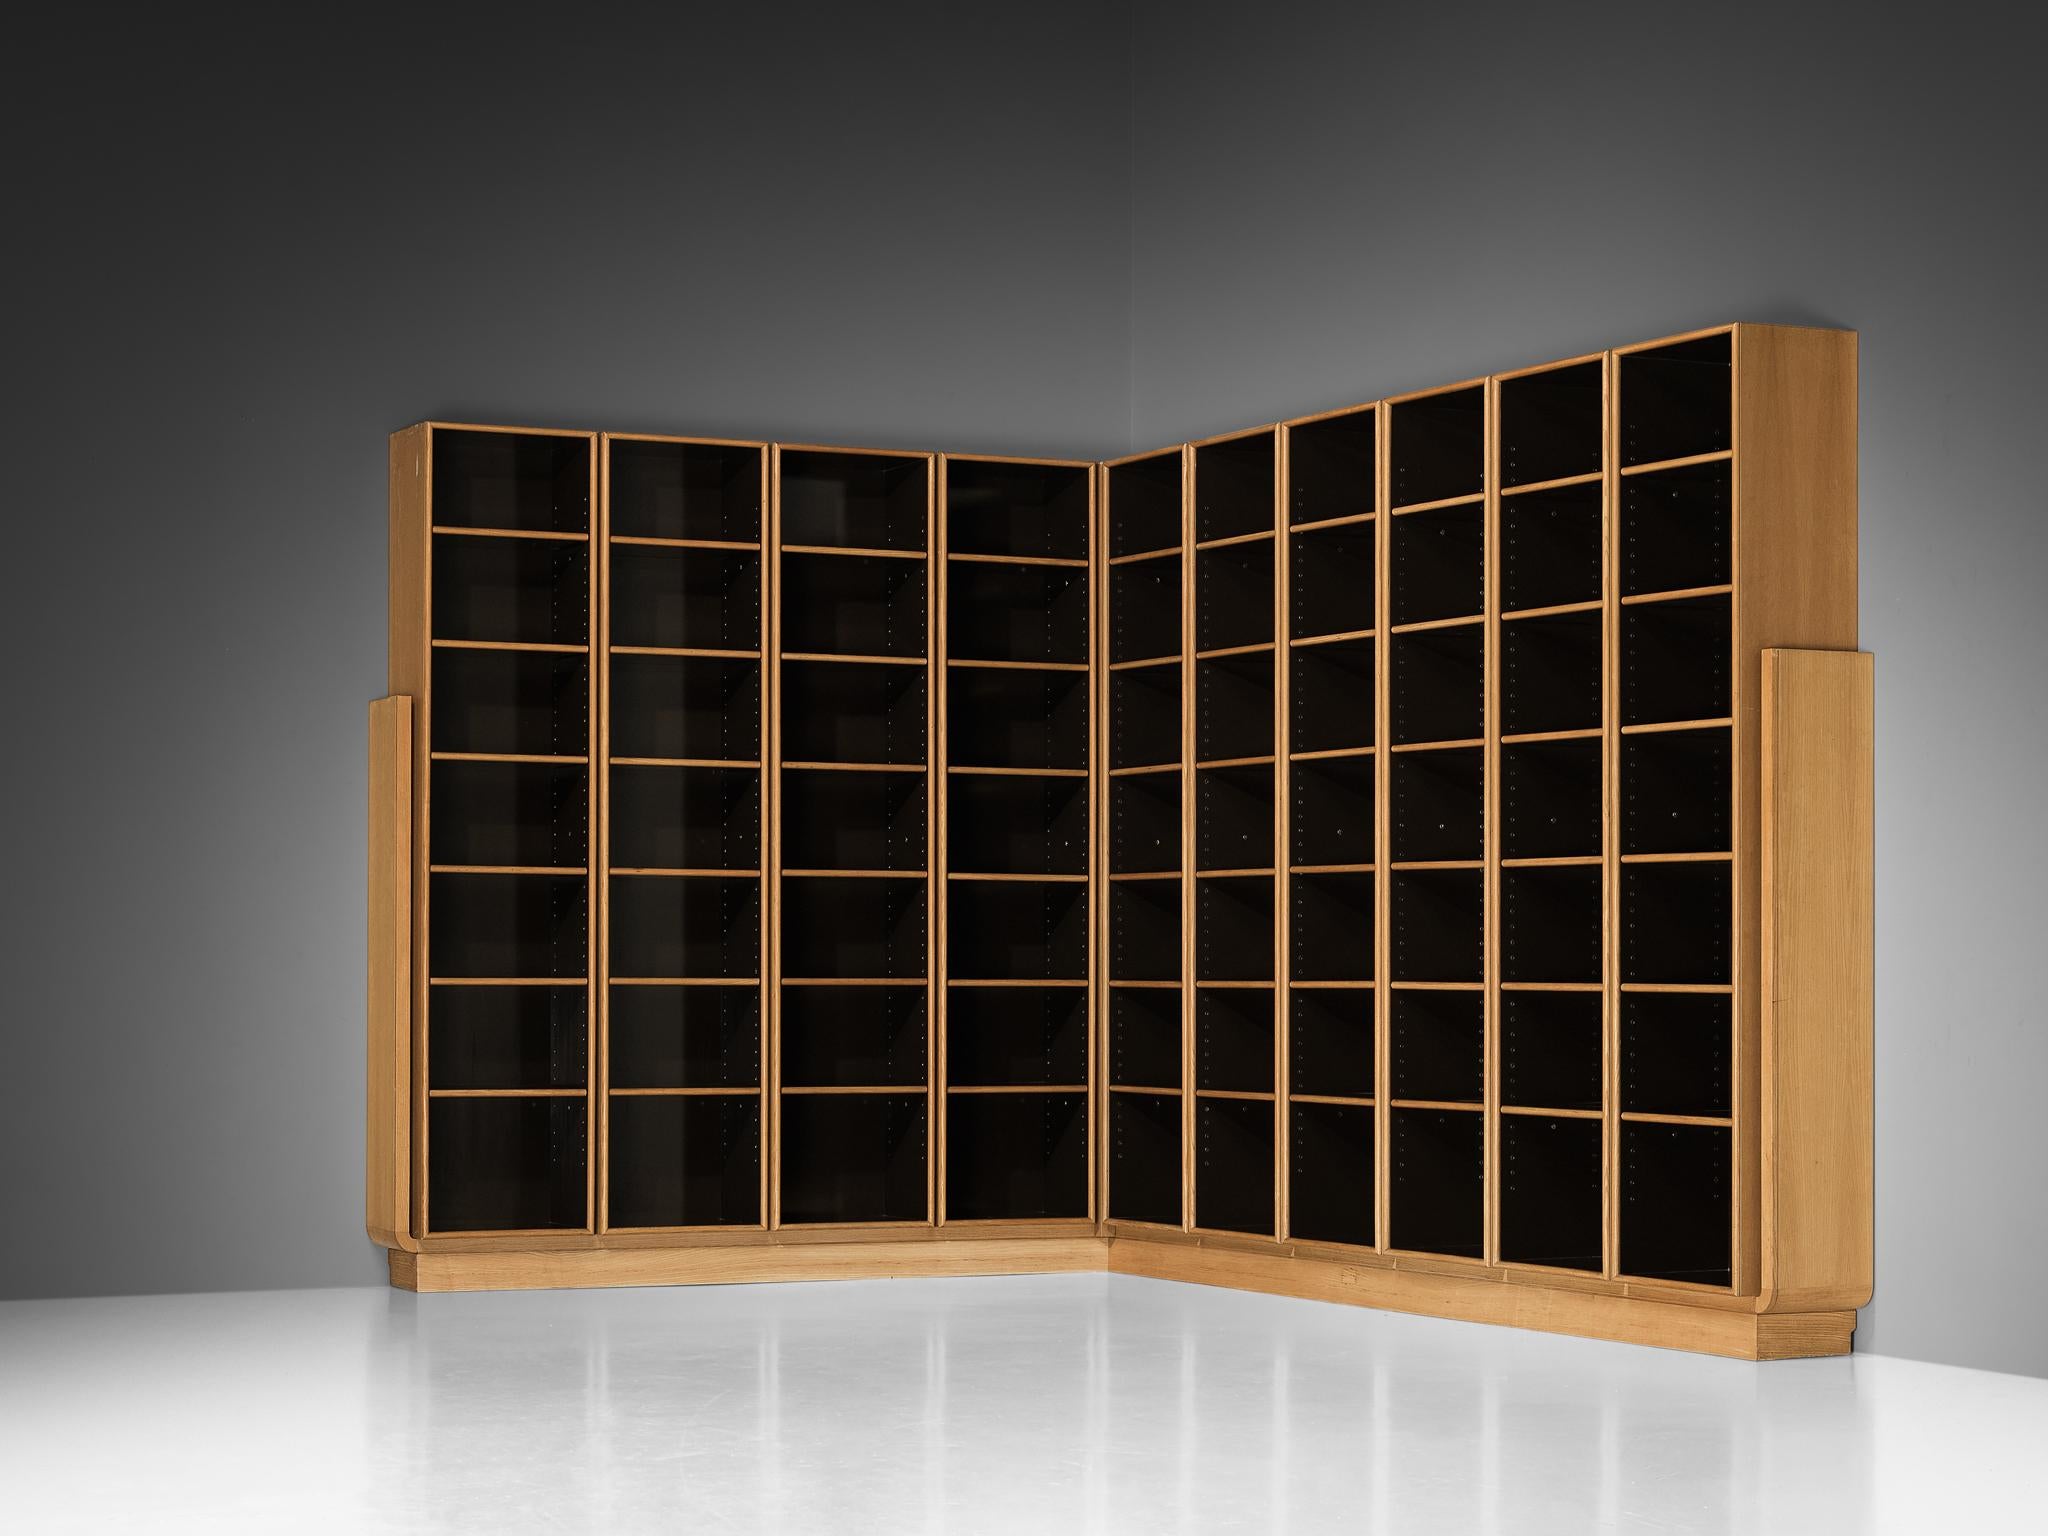 Toni Cordero, library bookcase, ash, plywood, Italy, 1972

Italian designer Toni Cordero (1937-2001) designed and made this bespoke bookcase in his own studio in Turin back in 1972. Its substantial size and solid construction command attention